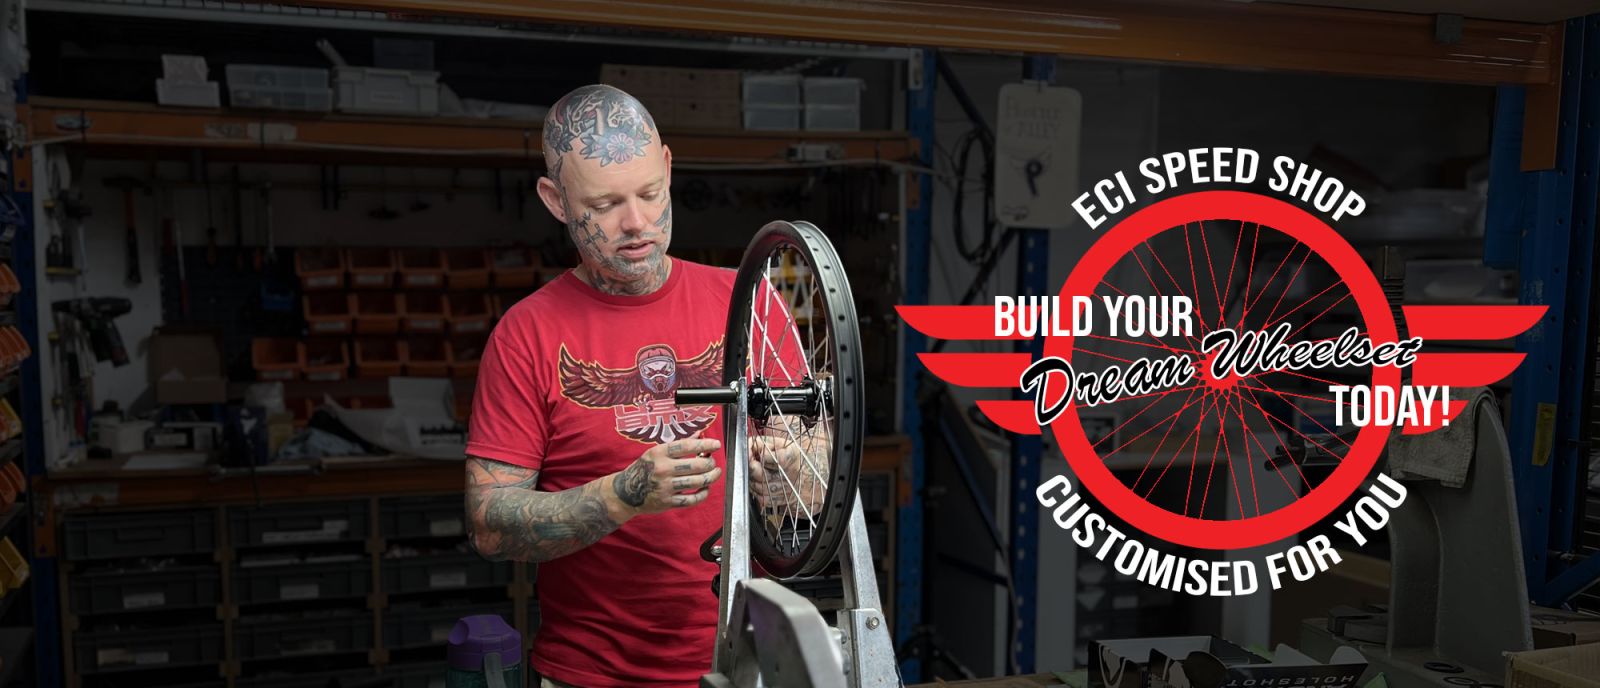 ECI Speed Shop Customs - Build Your Dream Wheelset Today!